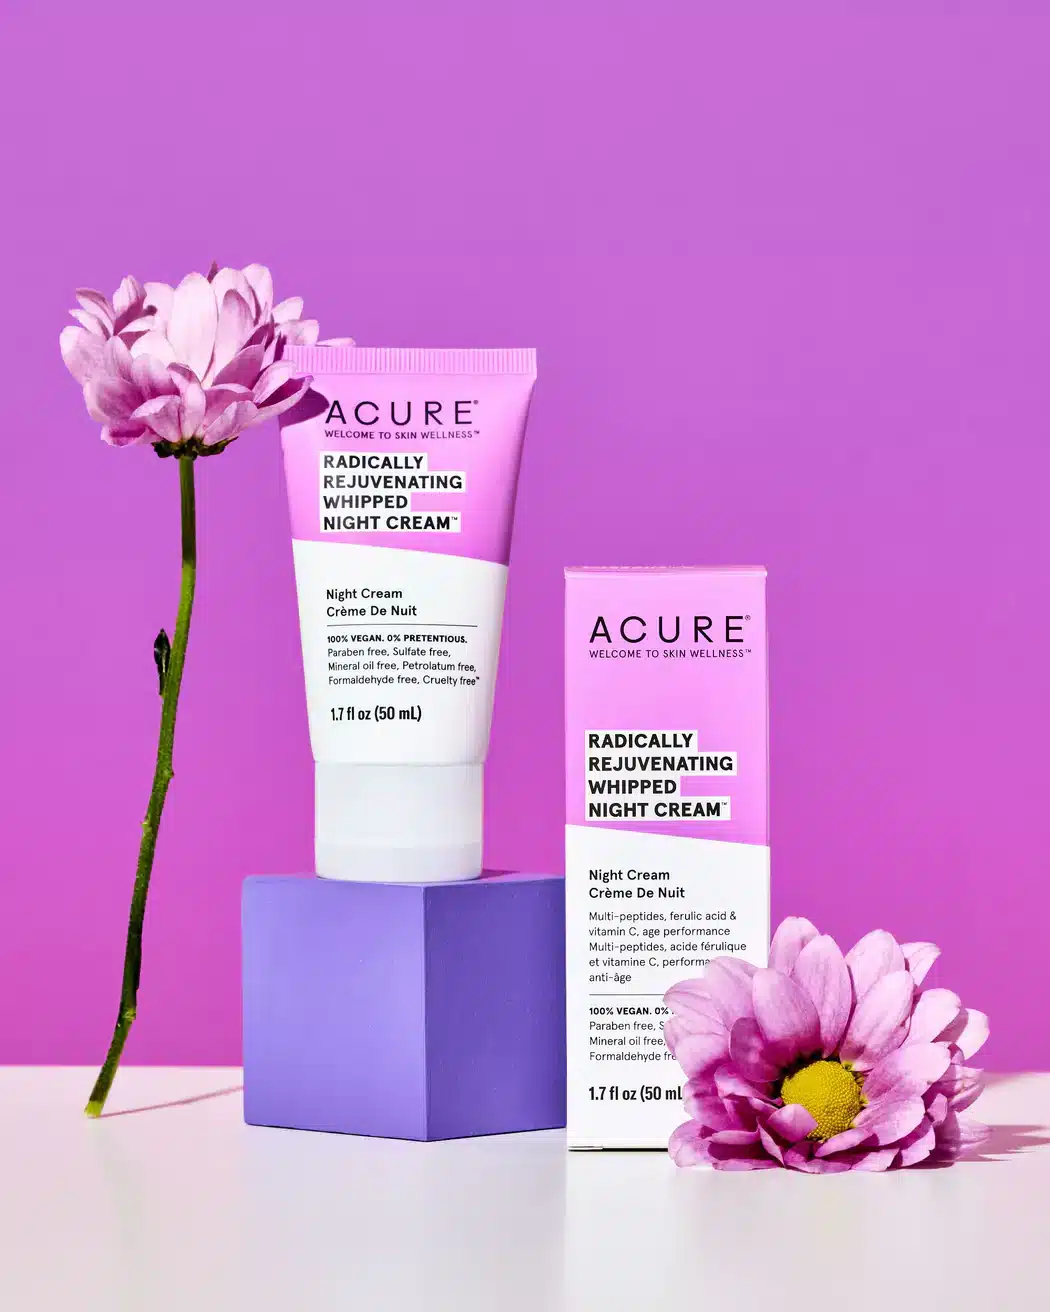 An image of Acure Radically Rejuvenating Whipped Night Cream sitting on a pink background with pink daisy flowers